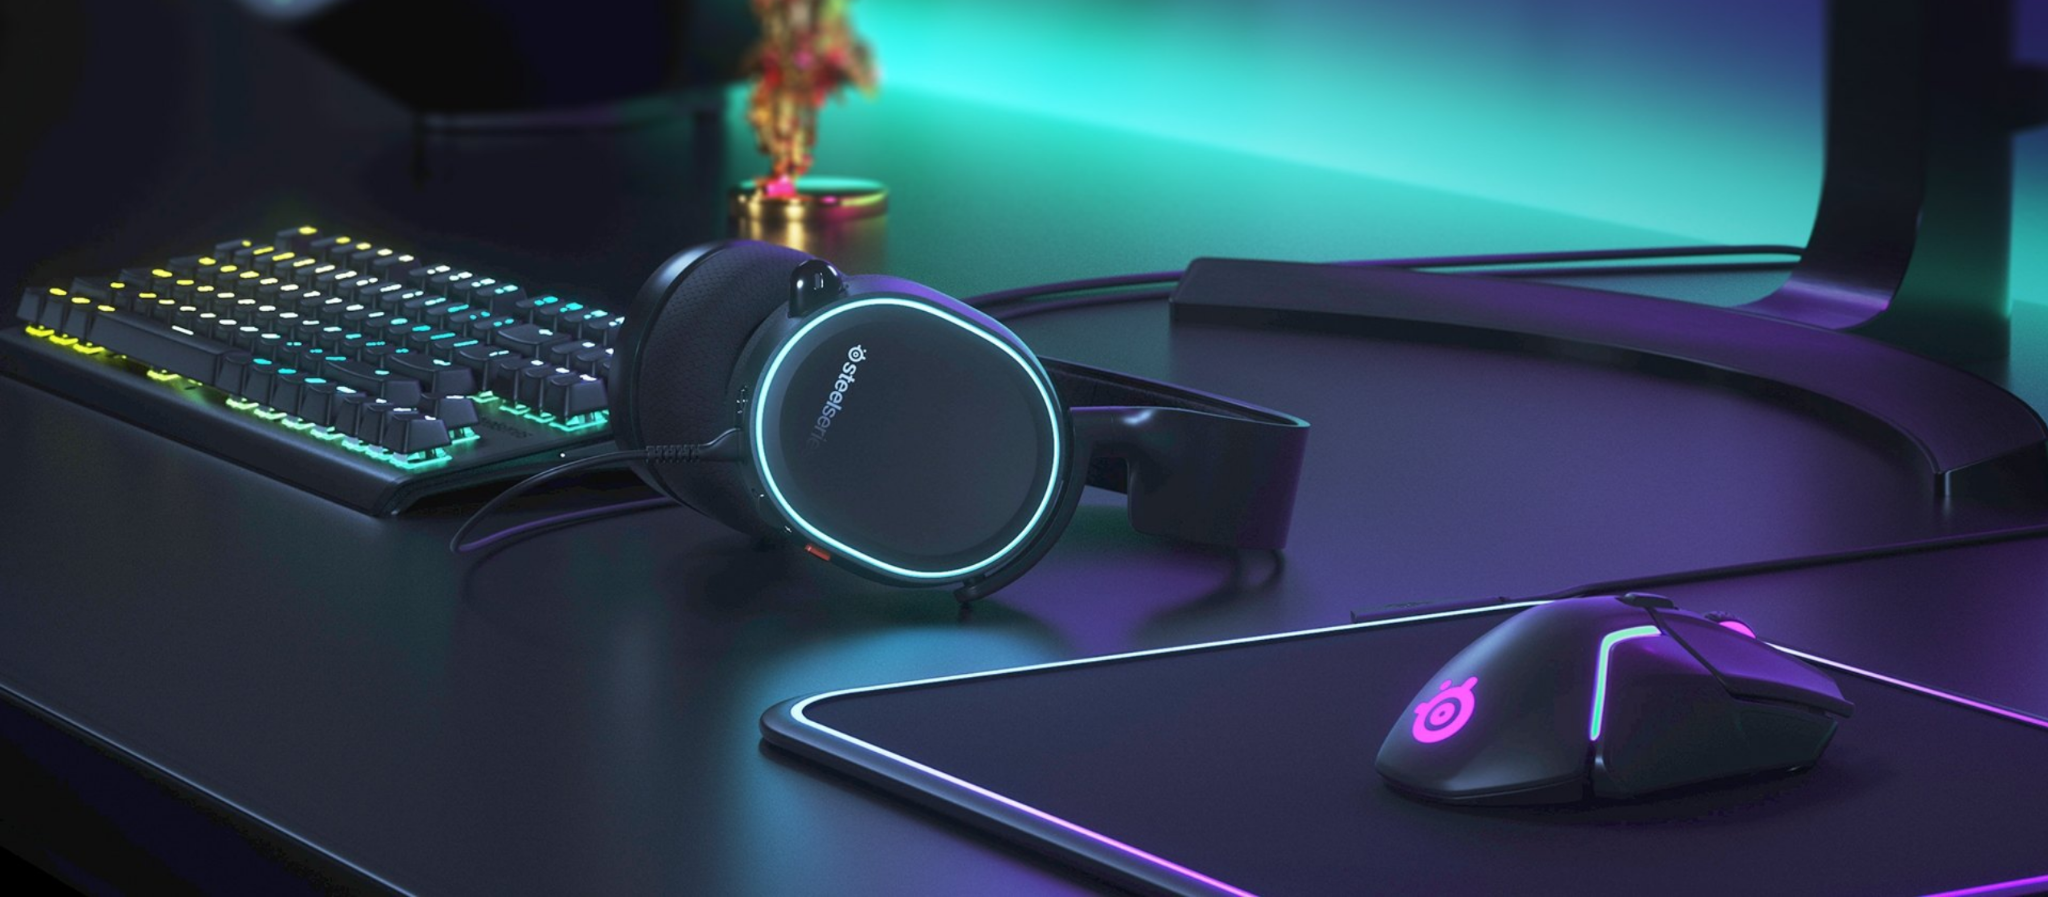 Tai nghe SteelSeries Arctis 5 Black Edition - 2019 Edition